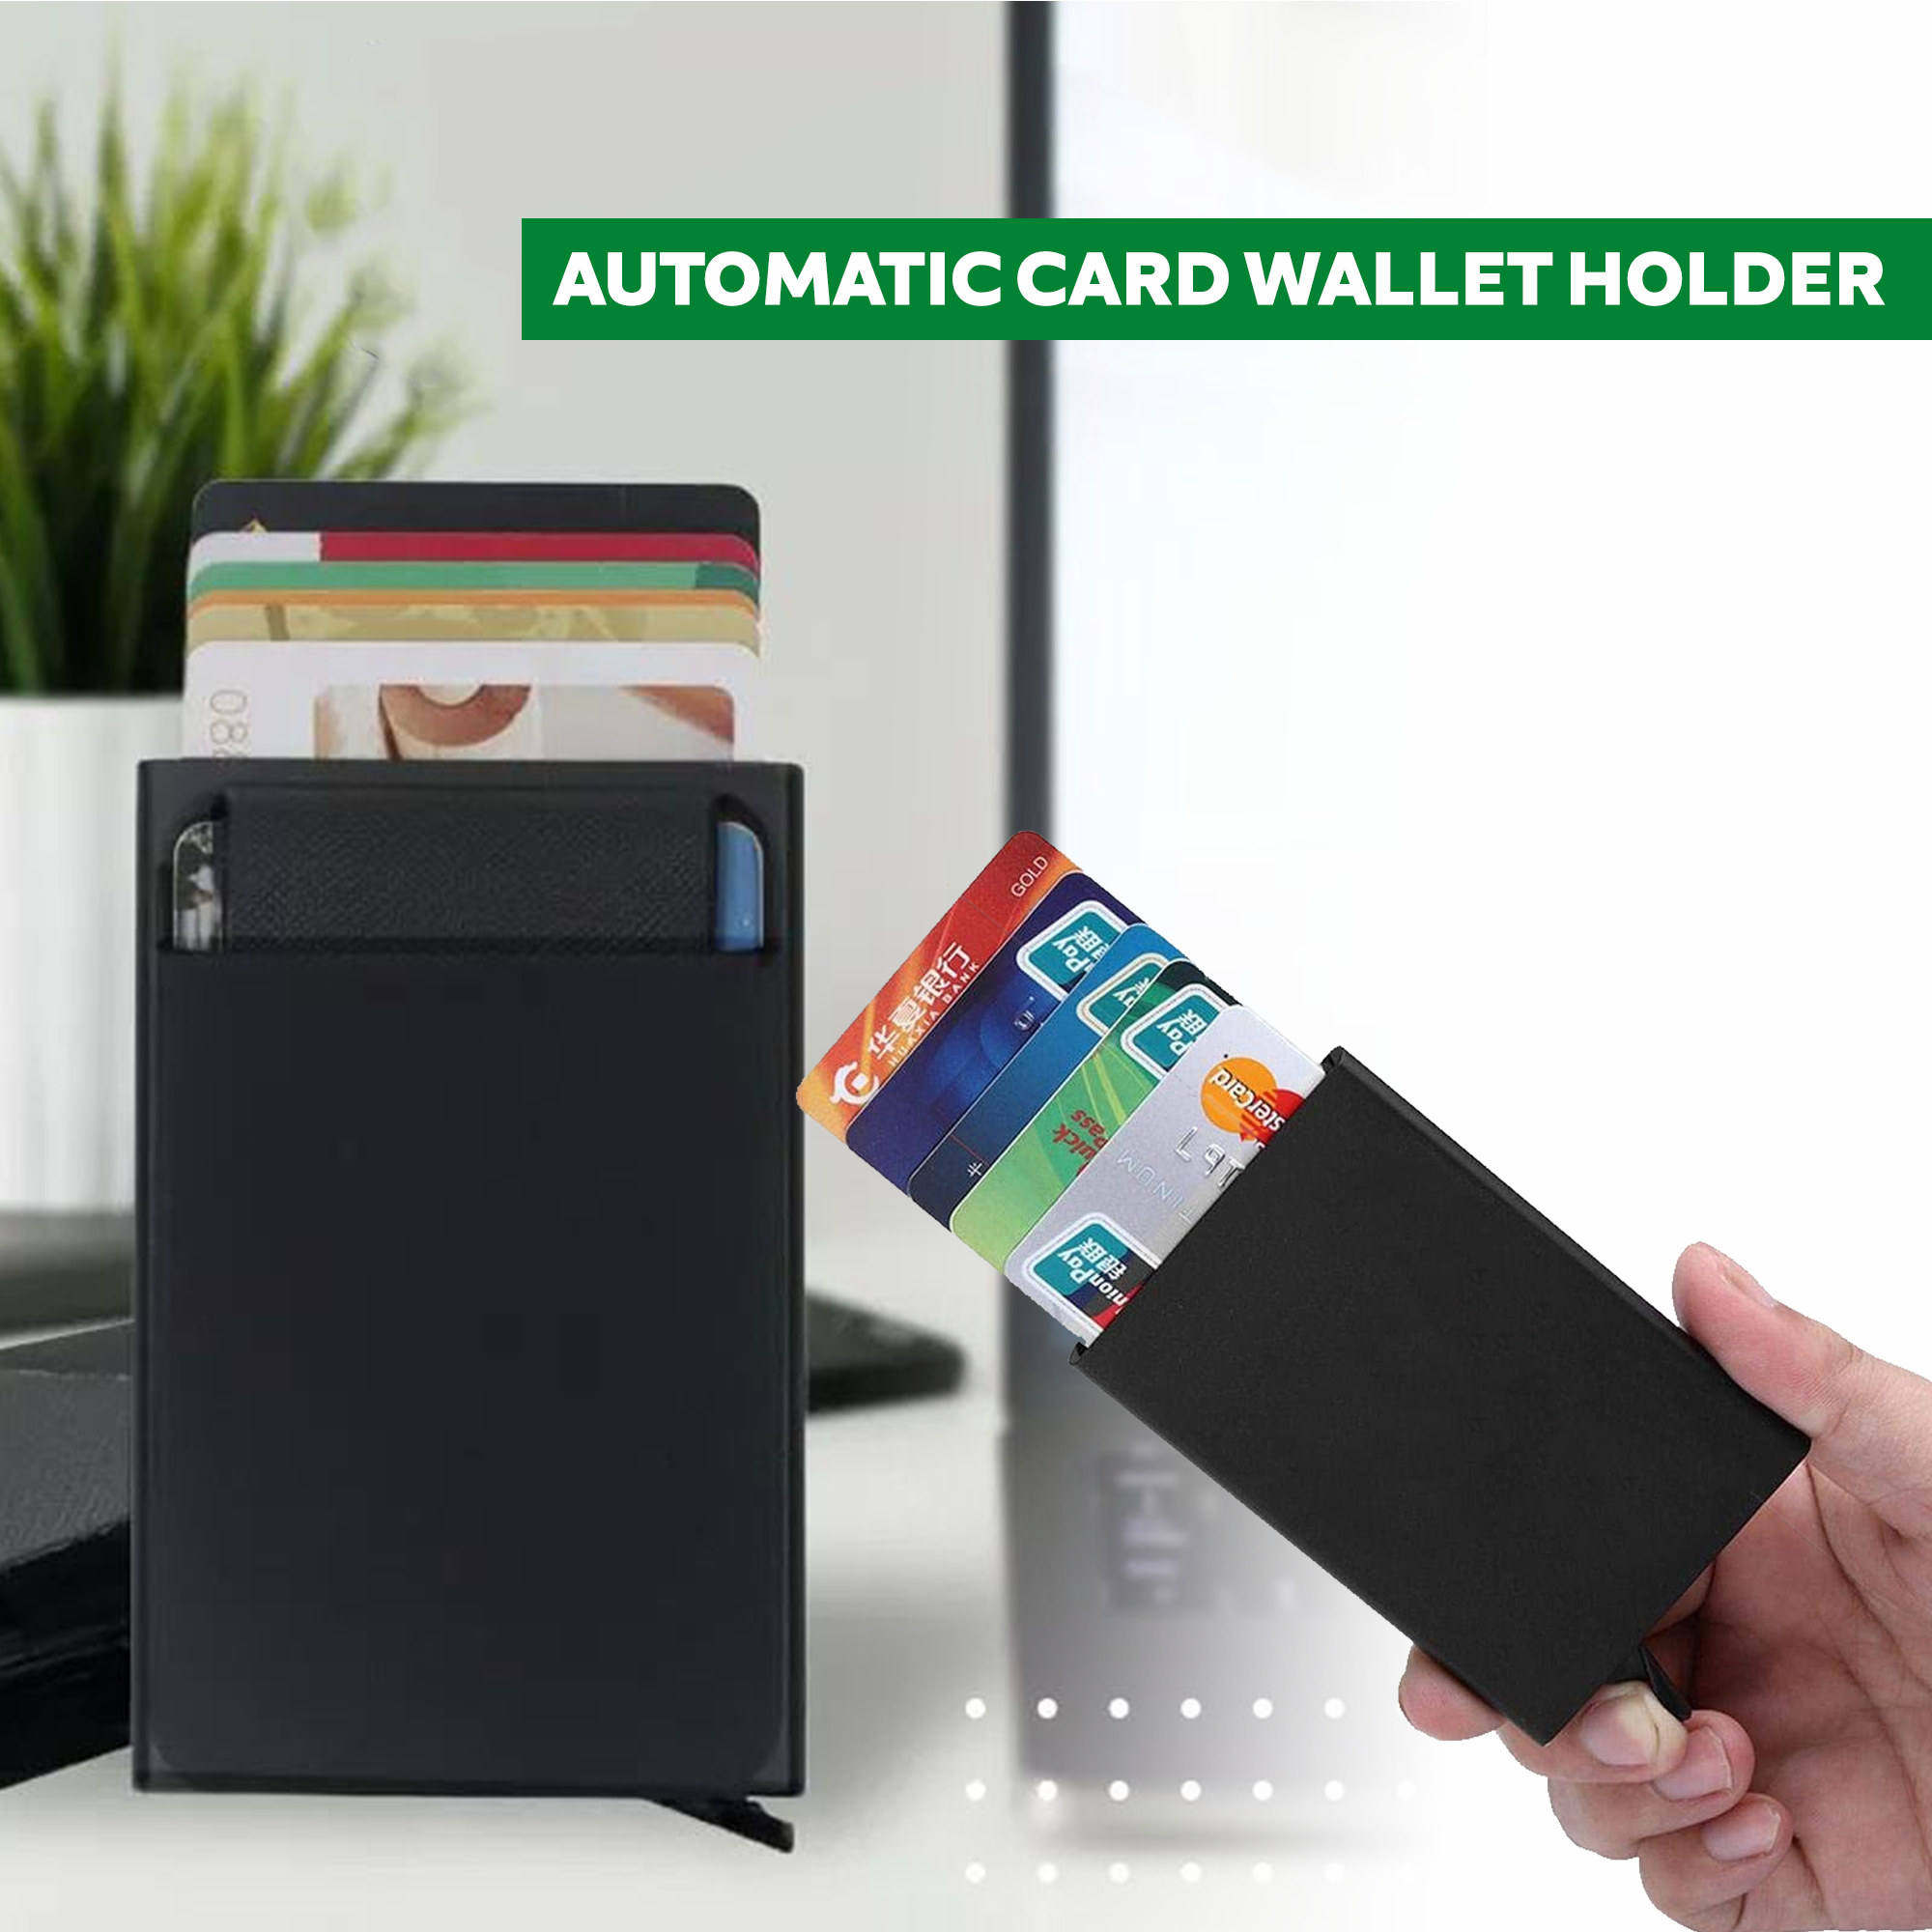 Automatic Card Wallet Holder